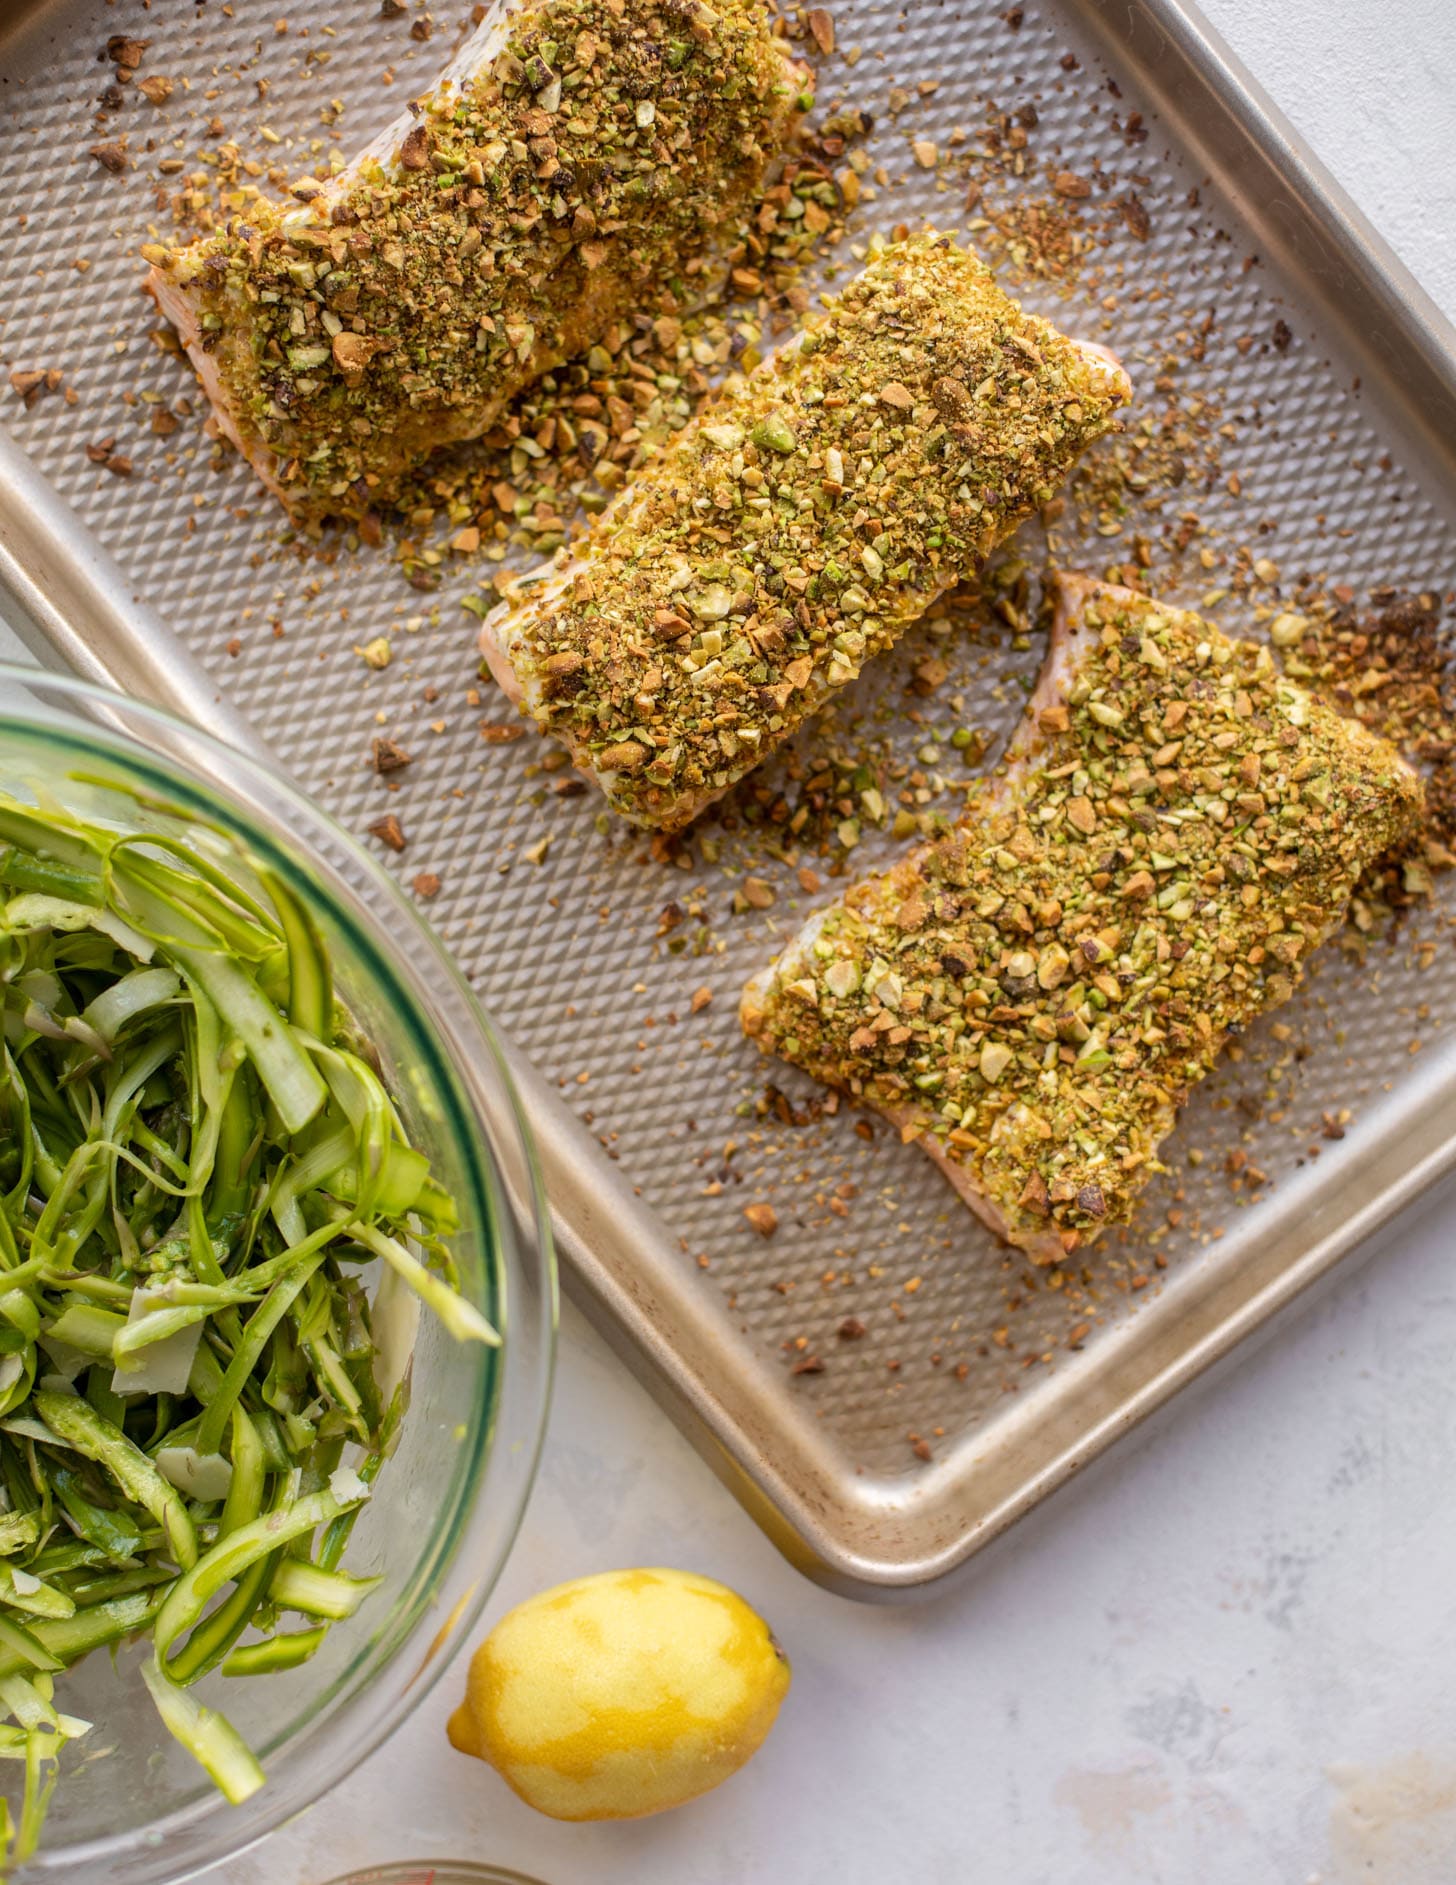 pistachio crusted salmon with shaved asparagus salad